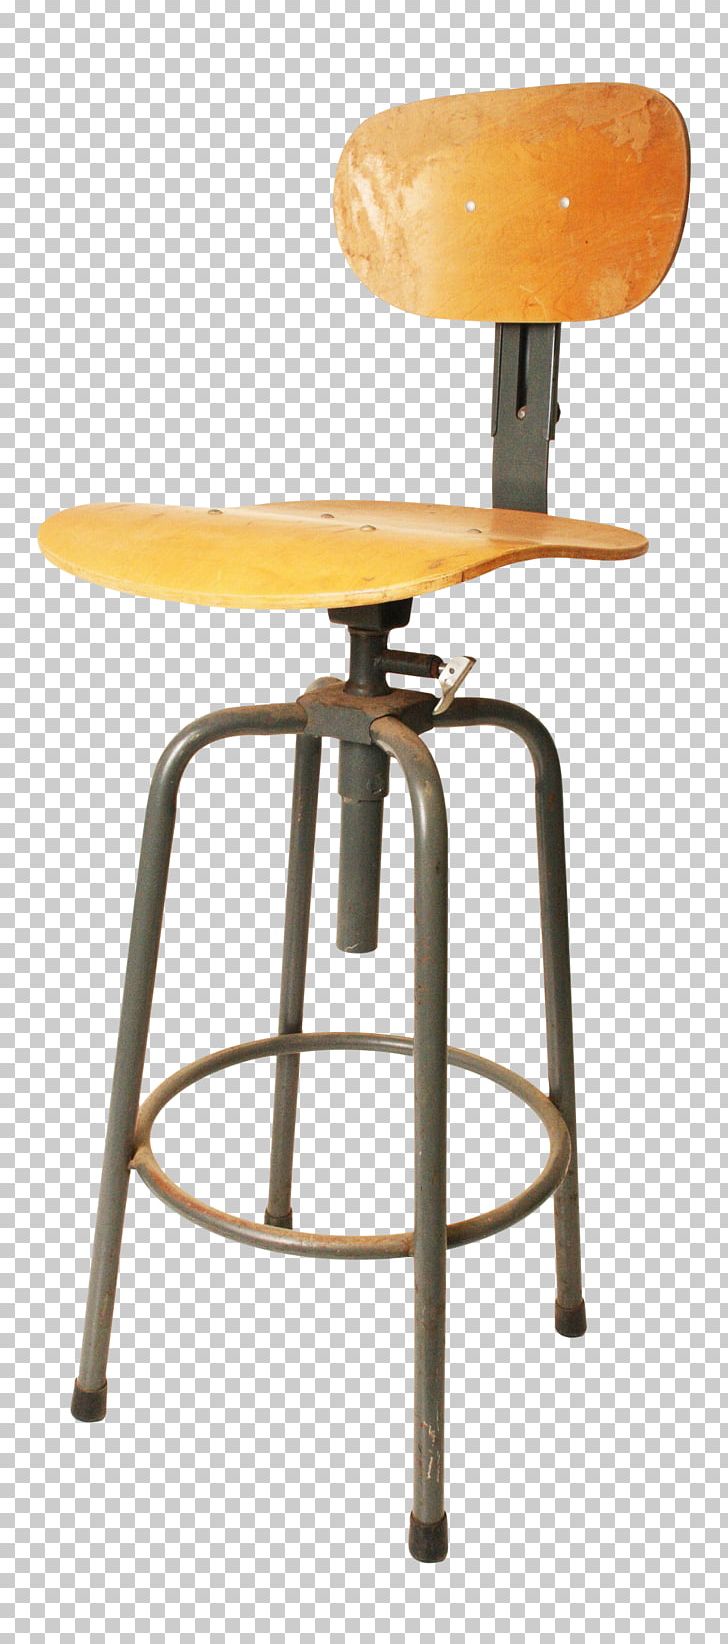 Bar Stool Table Chair Product Design PNG, Clipart, Bar, Bar Stool, Chair, Furniture, Outdoor Table Free PNG Download